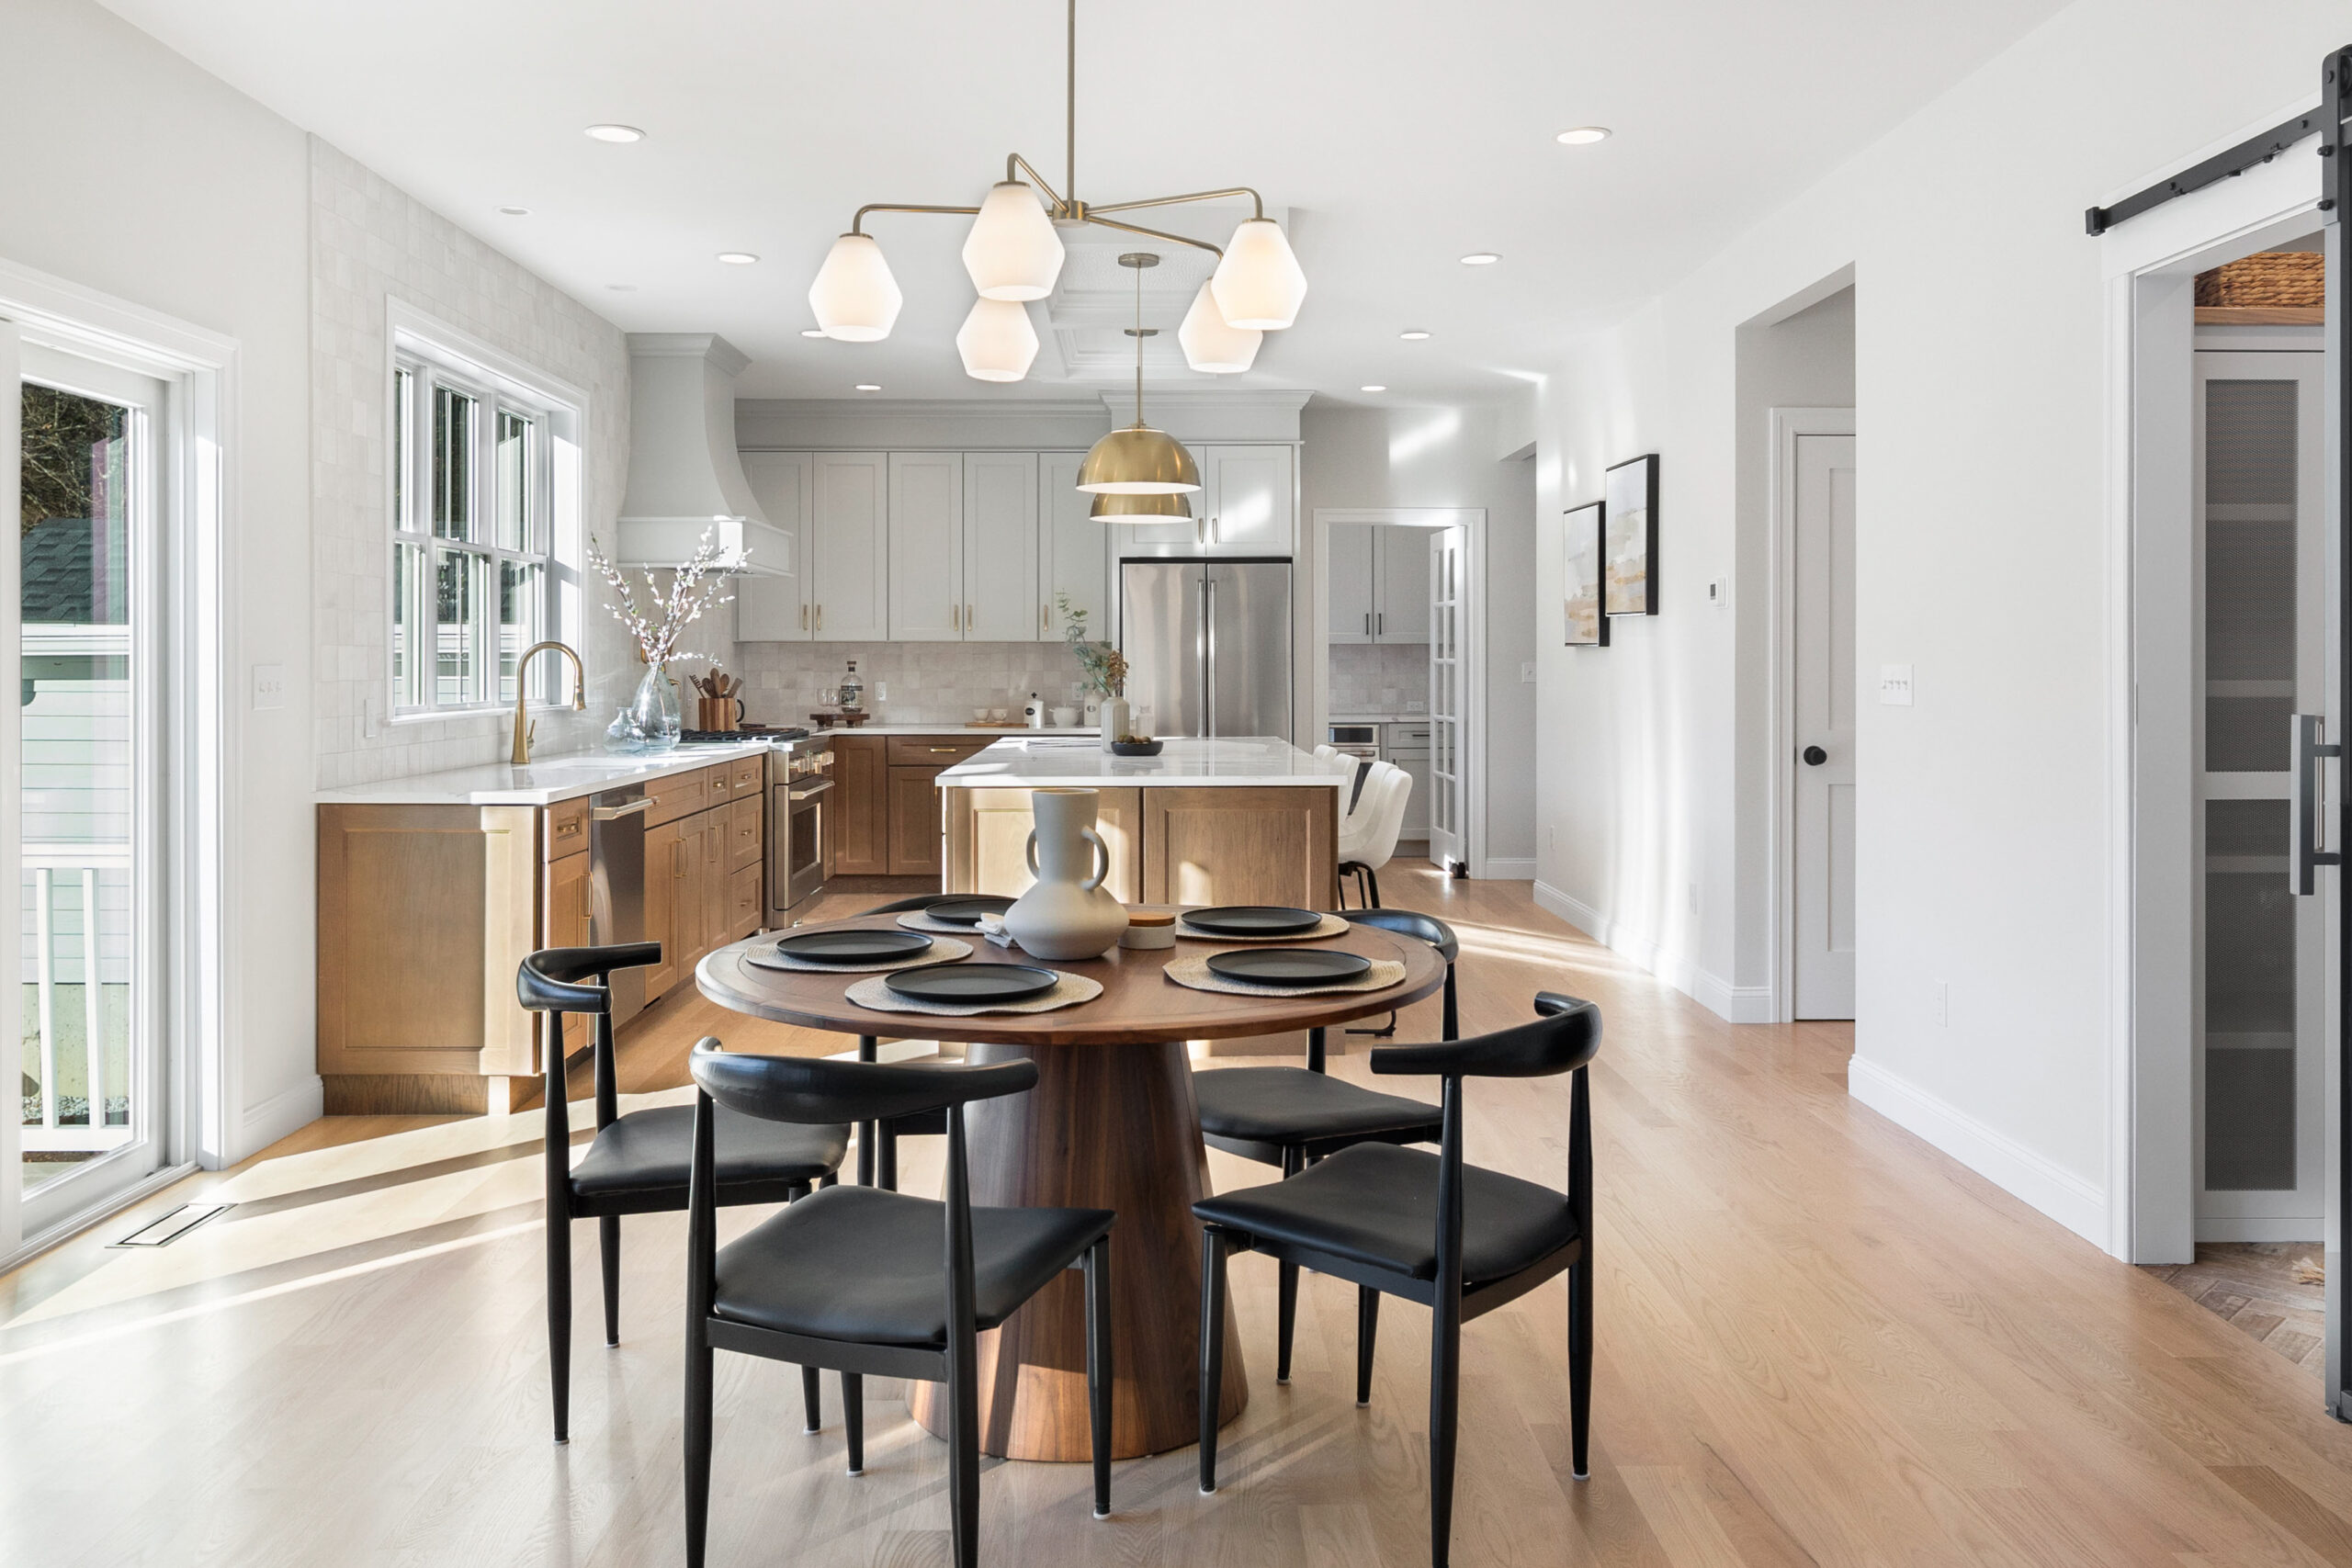 A well-lit open-plan space combining a dining area and kitchen. The dining area features a round, dark wood table with contemporary black chairs, set under a chic chandelier with multiple milky glass shades. In the kitchen area, white cabinetry with sleek hardware matches the marble countertops, and a central island provides additional seating with high stools. Two gold pendant lights add a touch of elegance over the island. Natural light floods the room through large windows and a sliding glass door, enhancing the warm tones of the light wood flooring. The kitchen is equipped with stainless steel appliances, and a black sliding barn door adds a modern farmhouse feel to the space.